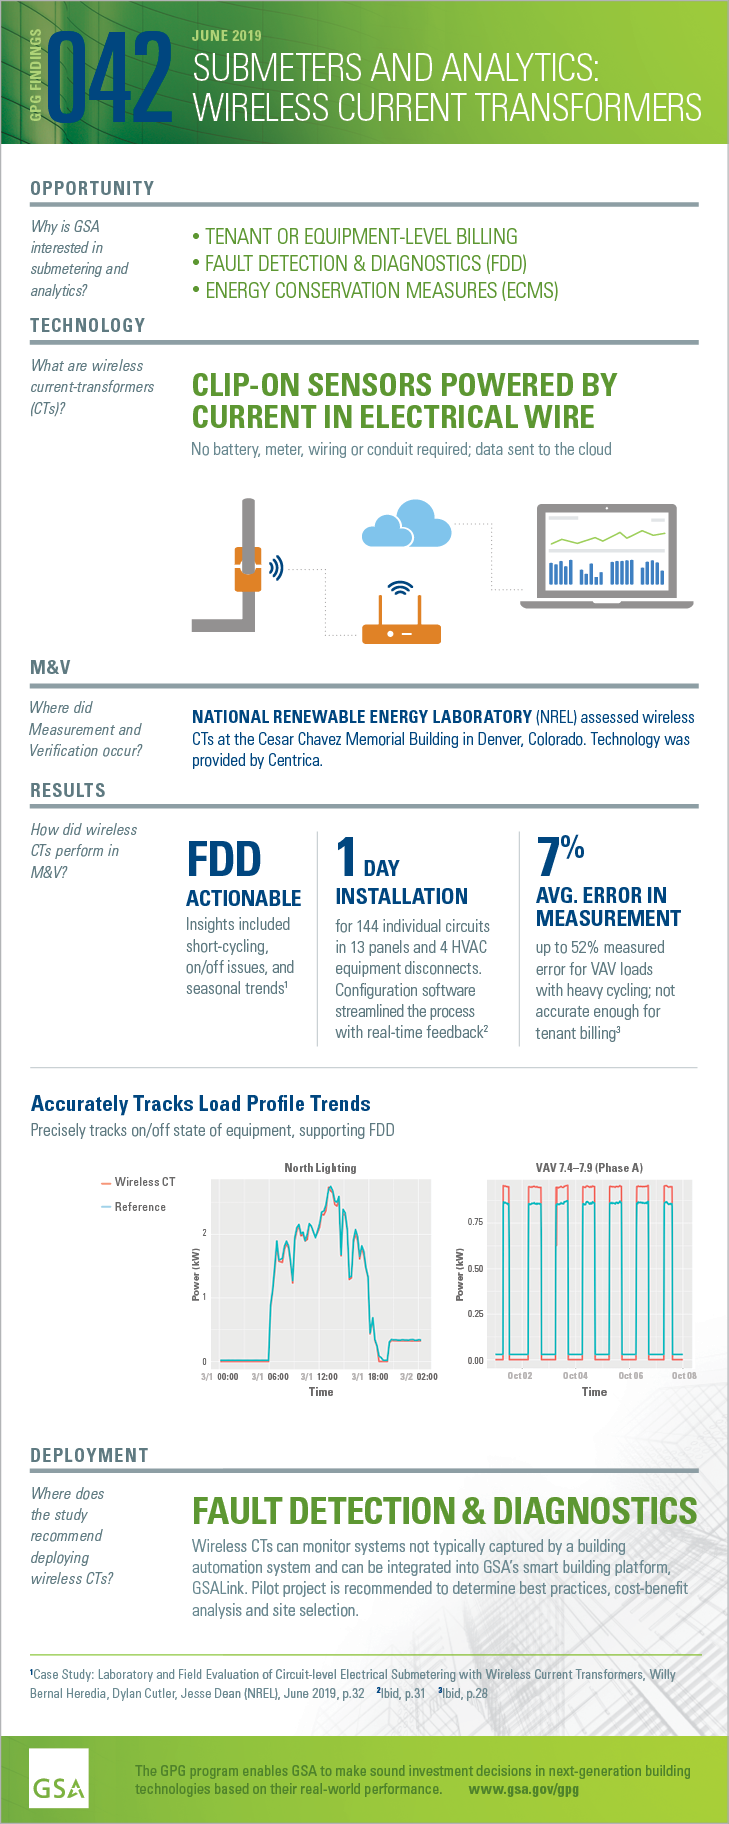 Infographic- Submeters and Analytics- Wireless CTs